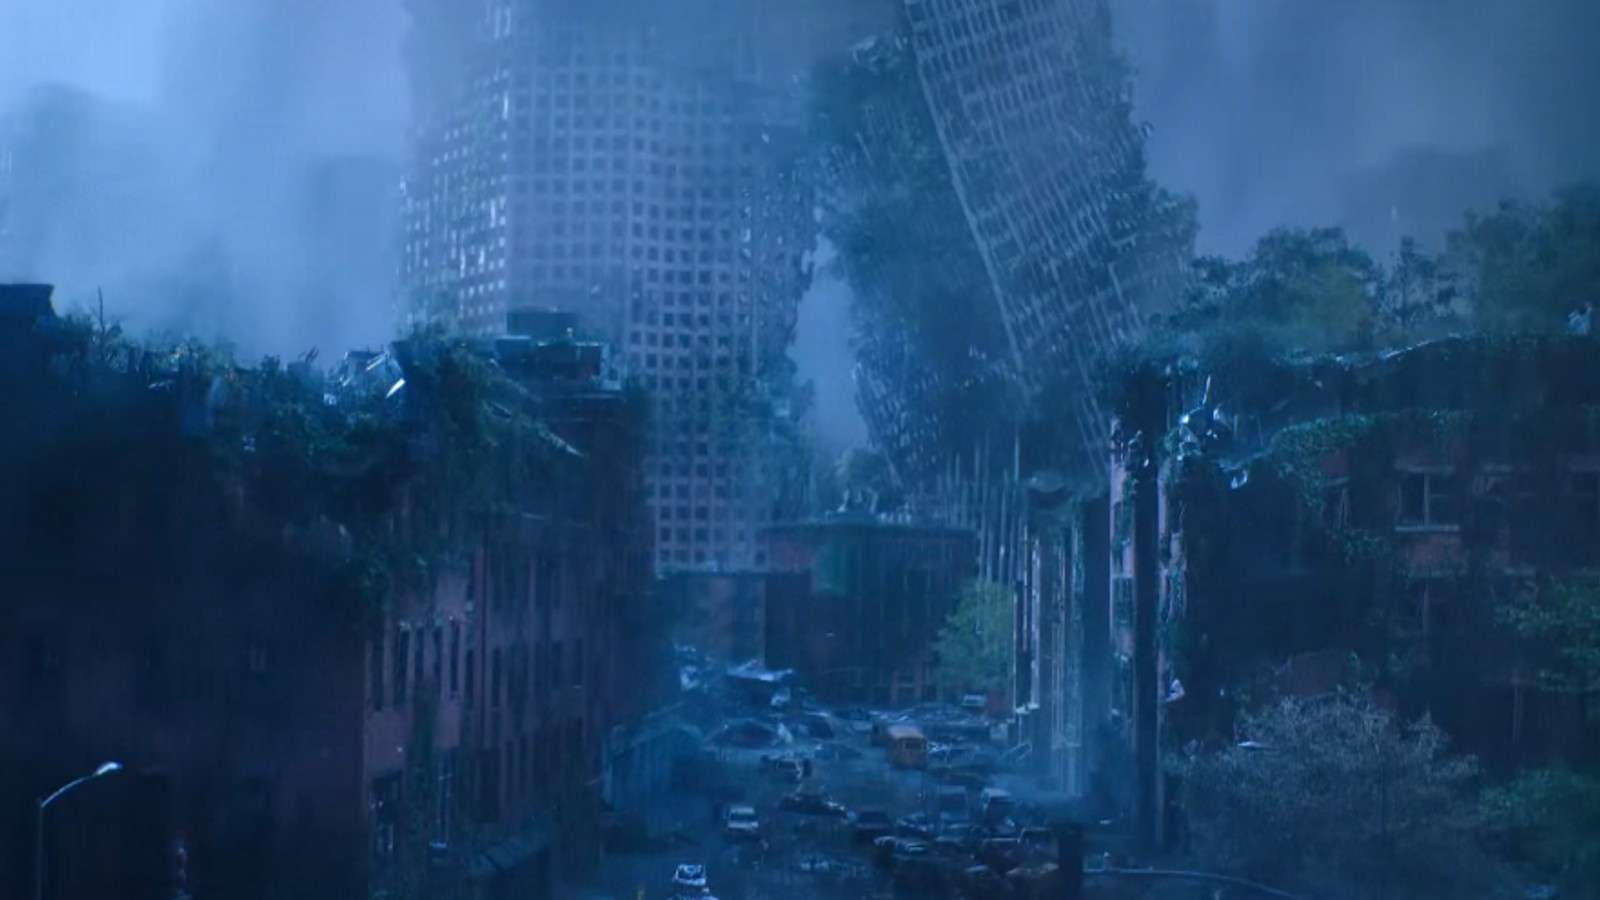 The end shot of The Last of Us Episode 1, showing the ruined cityscape